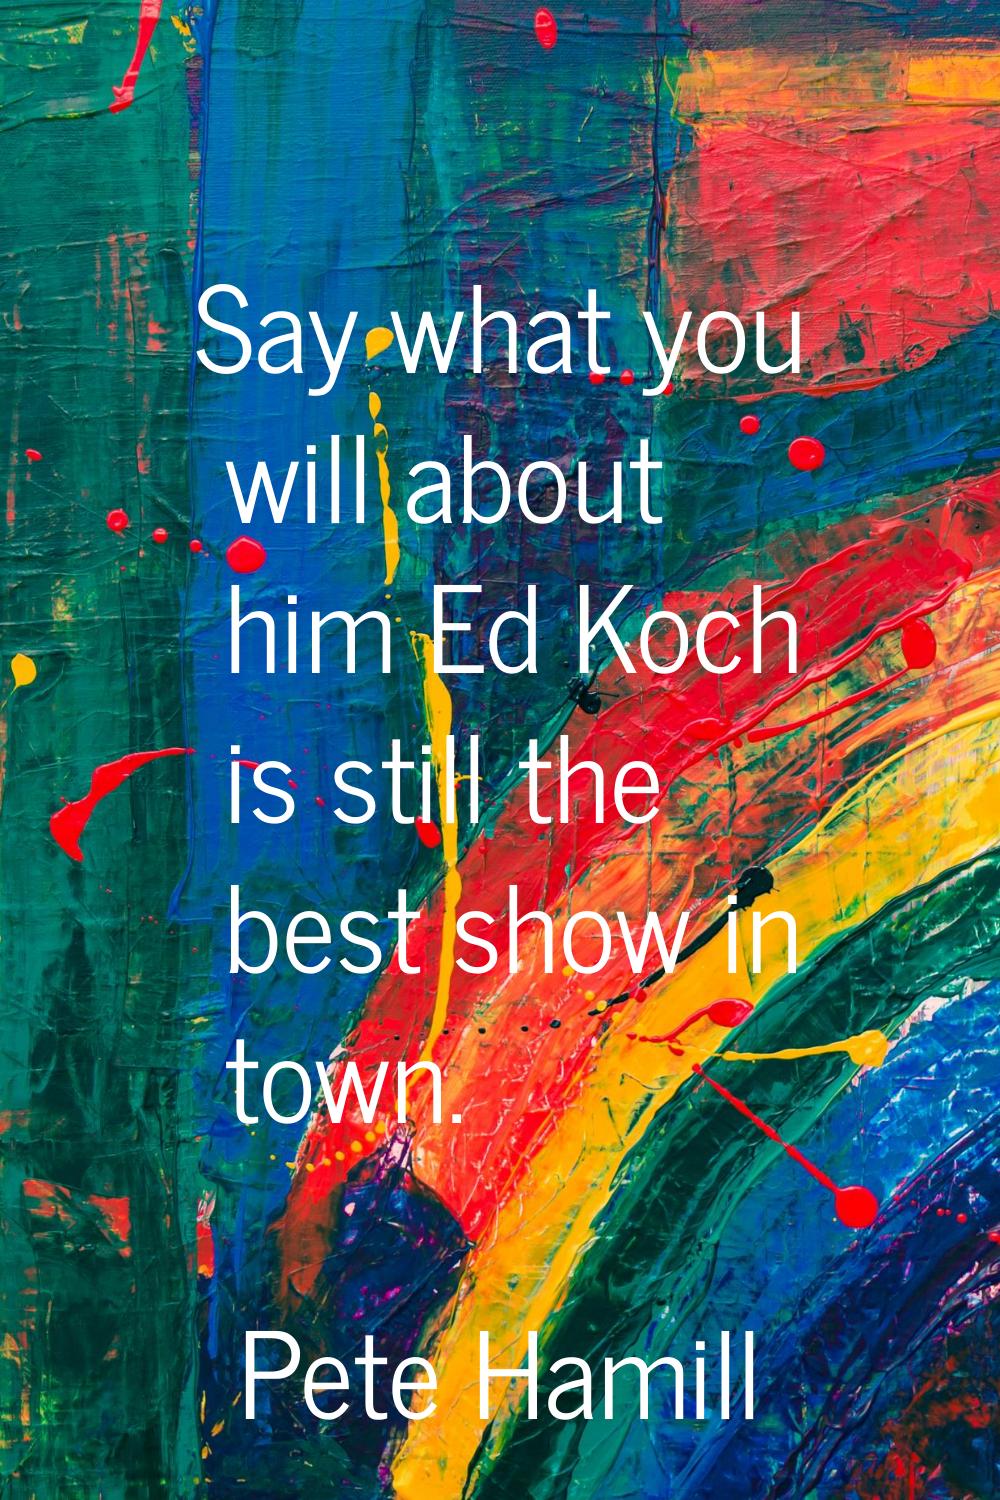 Say what you will about him Ed Koch is still the best show in town.